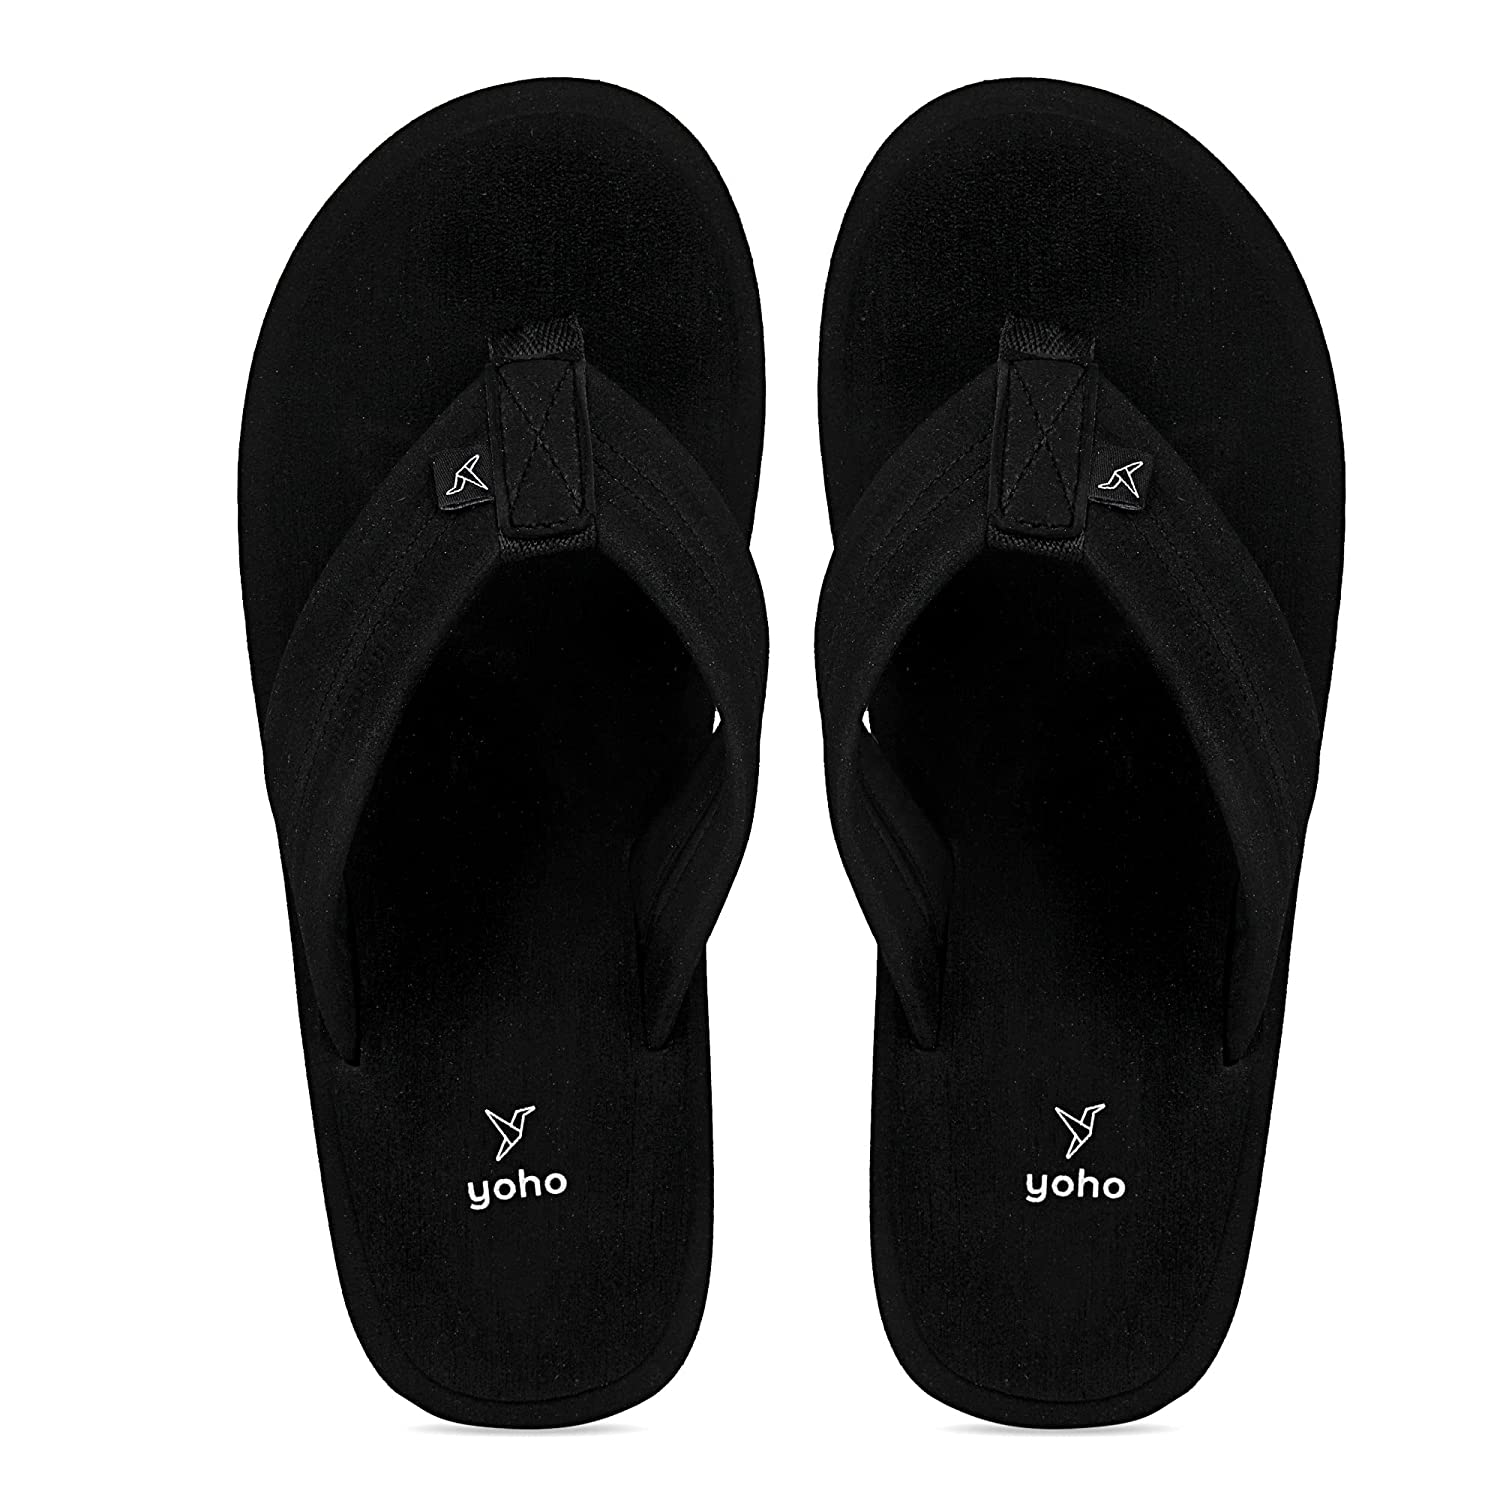 YOHO Bubbles Men Ortho slippers | Soft comfortable and stylish flip flop slippers for Men in exciting colors |Lightweight | Anti Skid | Daily Use Chappal